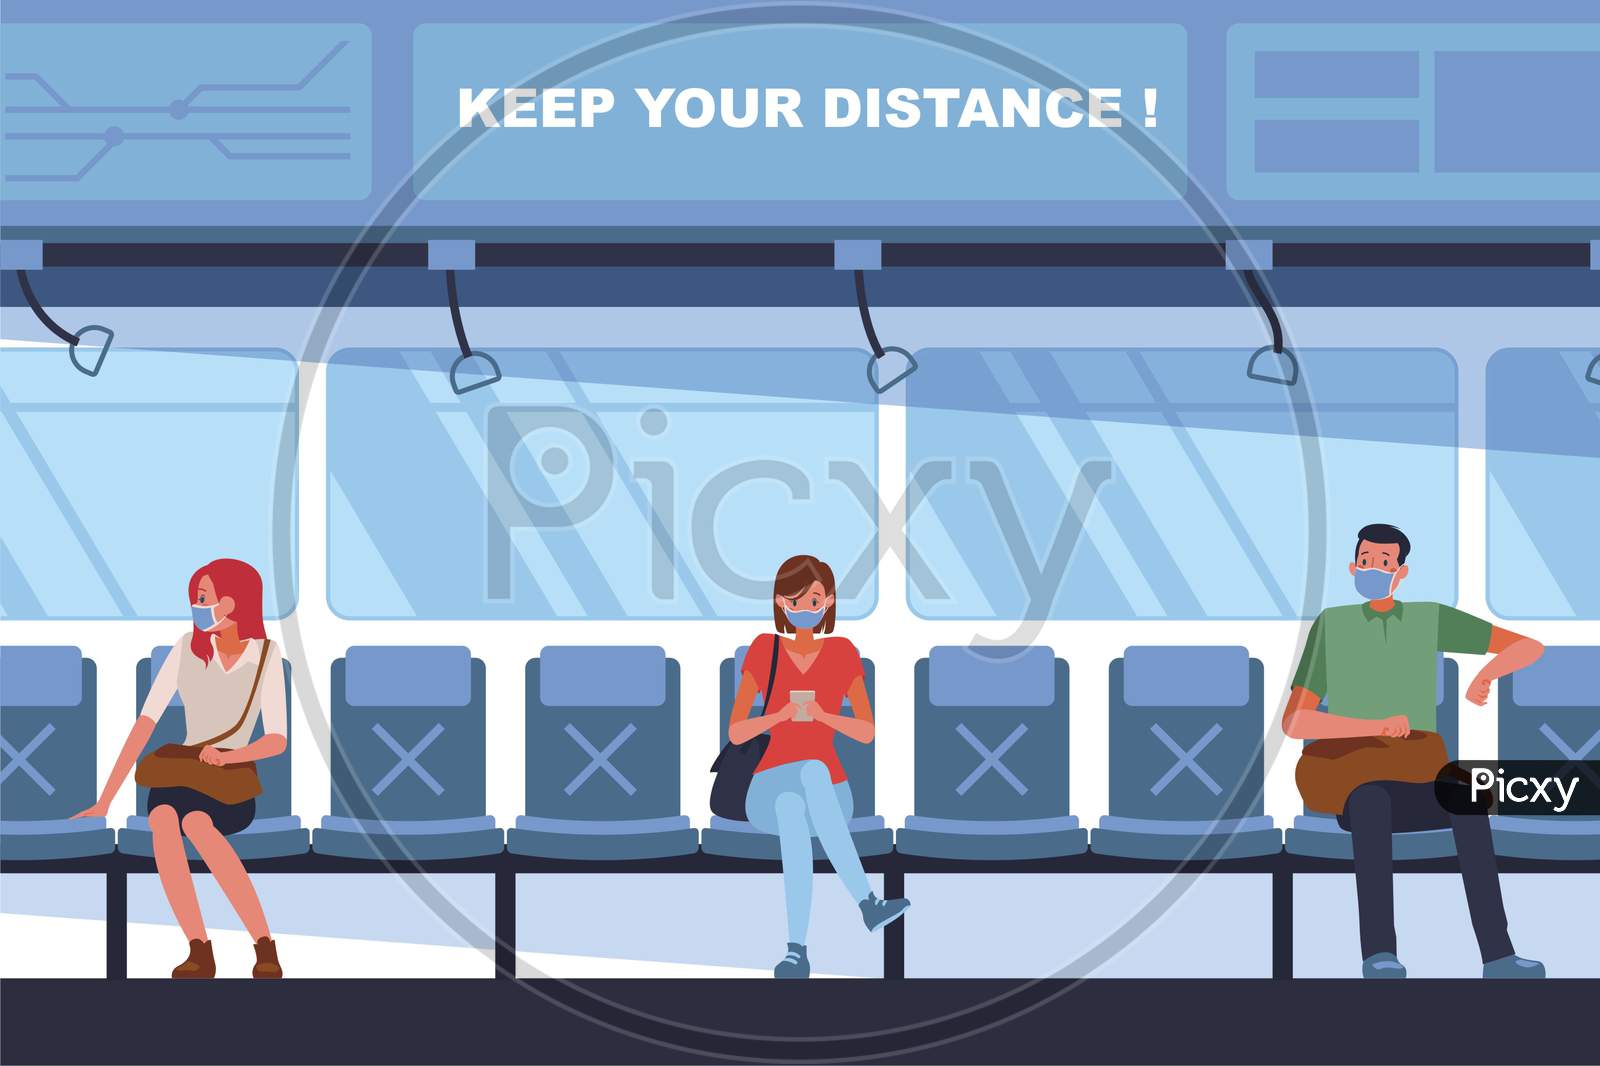 keep your distance in public transport for covid-19 corona virus